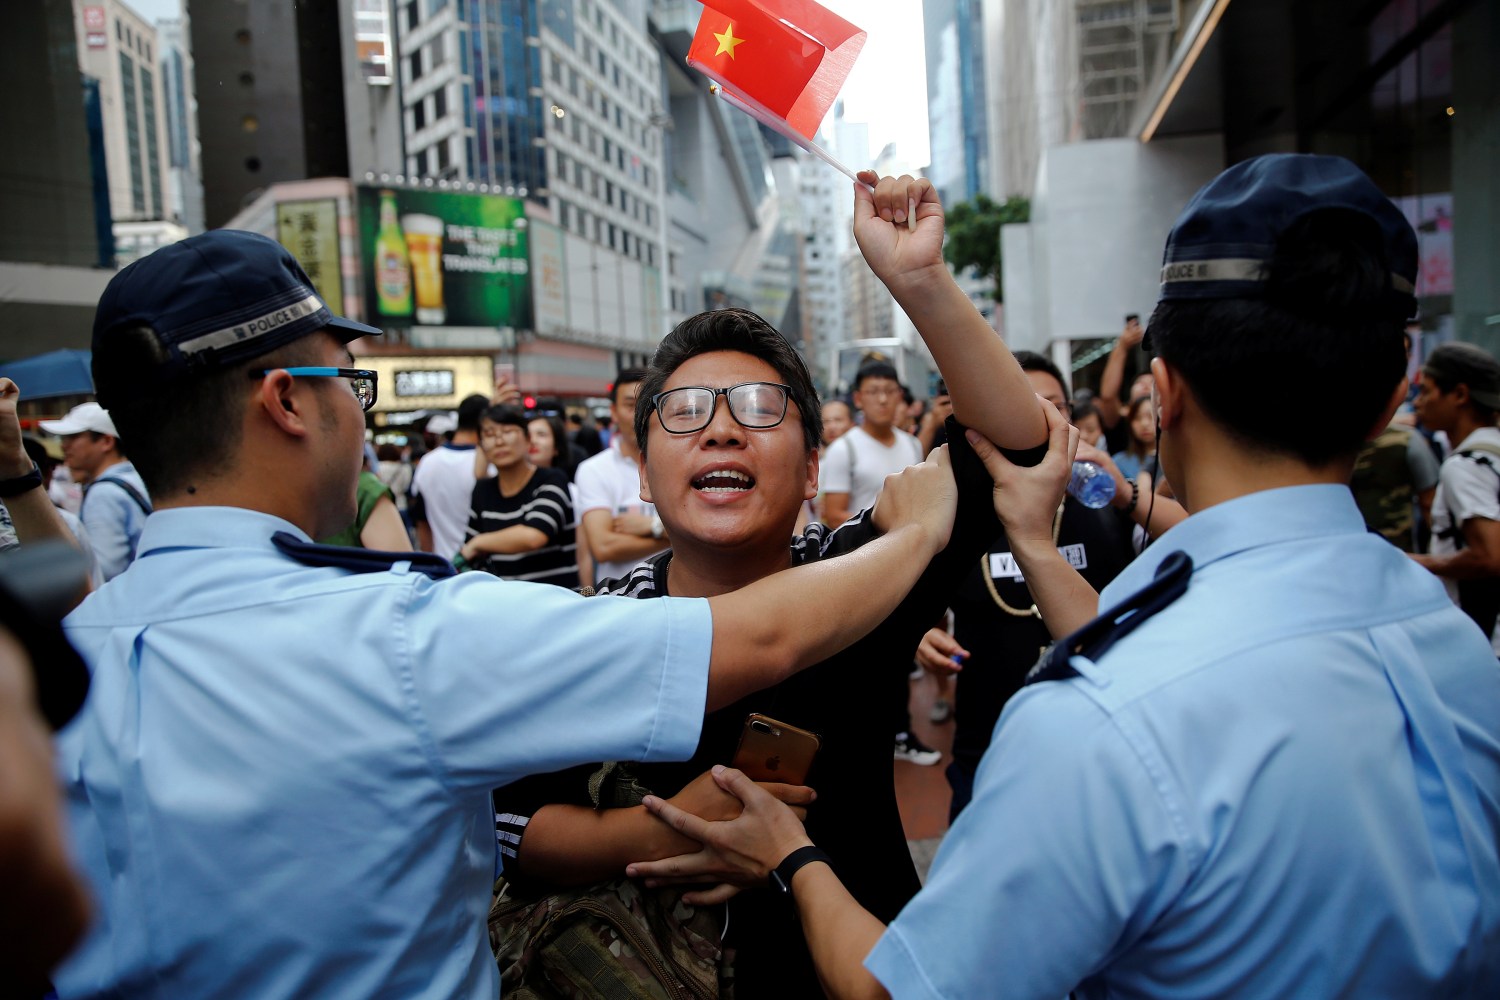 A pro-China supporter is stopped by police as he tries to get closer to pro-democracy supporters during a march. Hong Kong, China July 1, 2017. REUTERS/Damir Sagolj